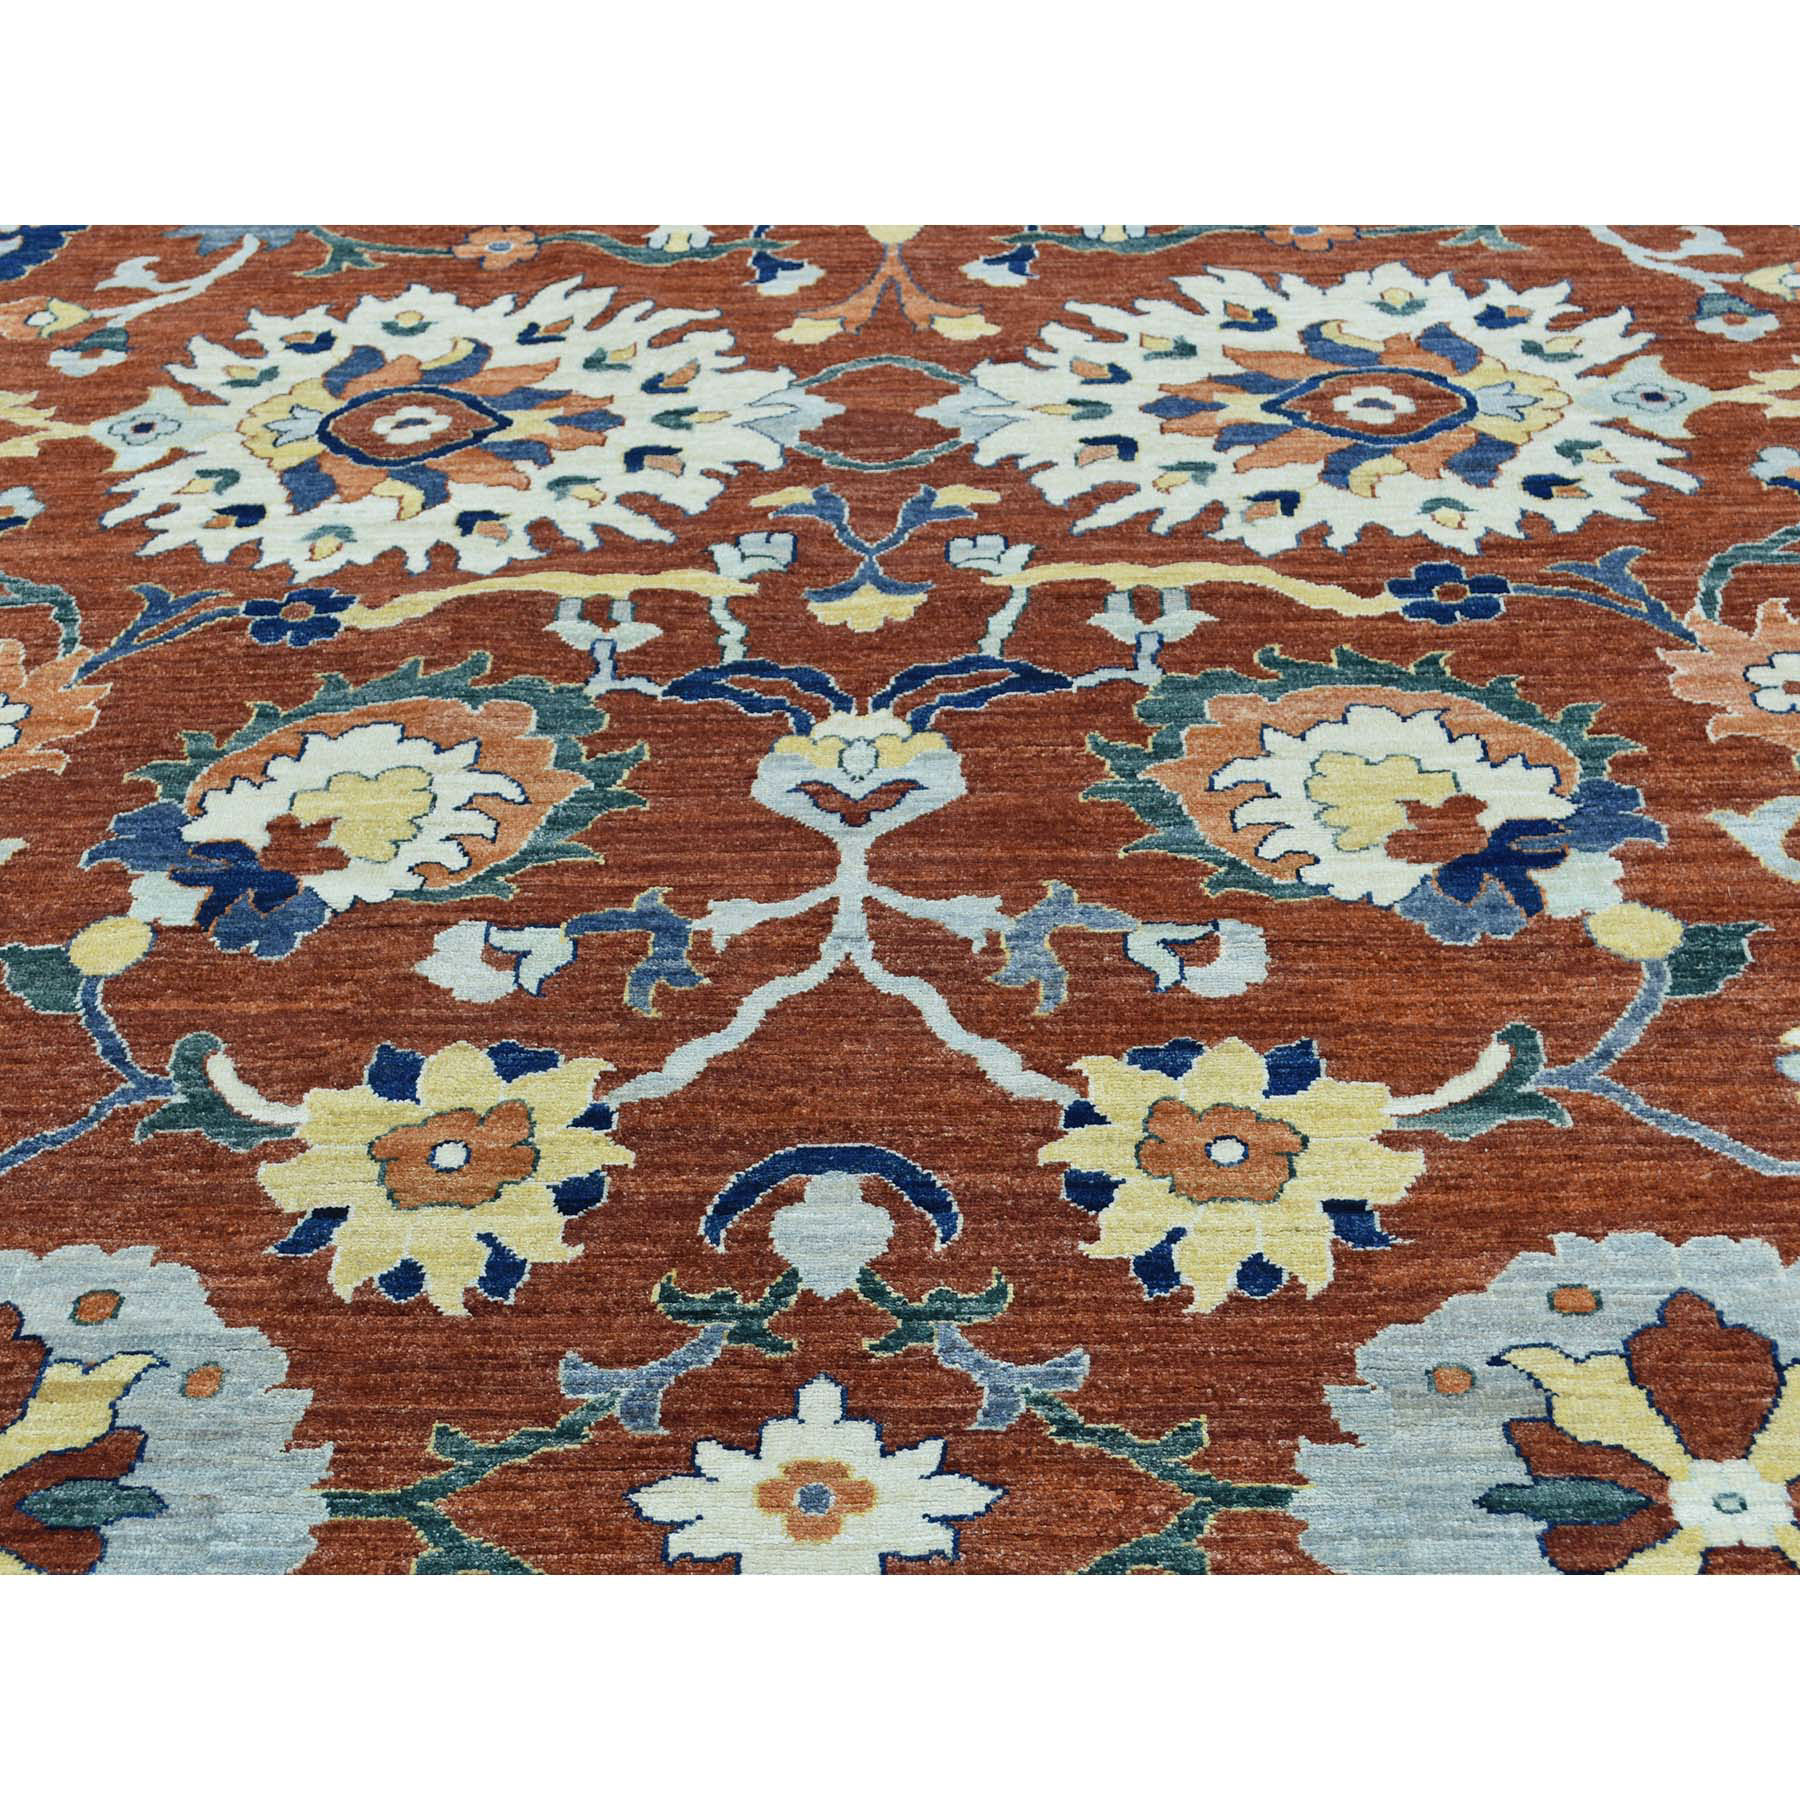 10-x14- Hand-Knotted Pure Wool Peshawar Sultanabad Design Oriental Rug 